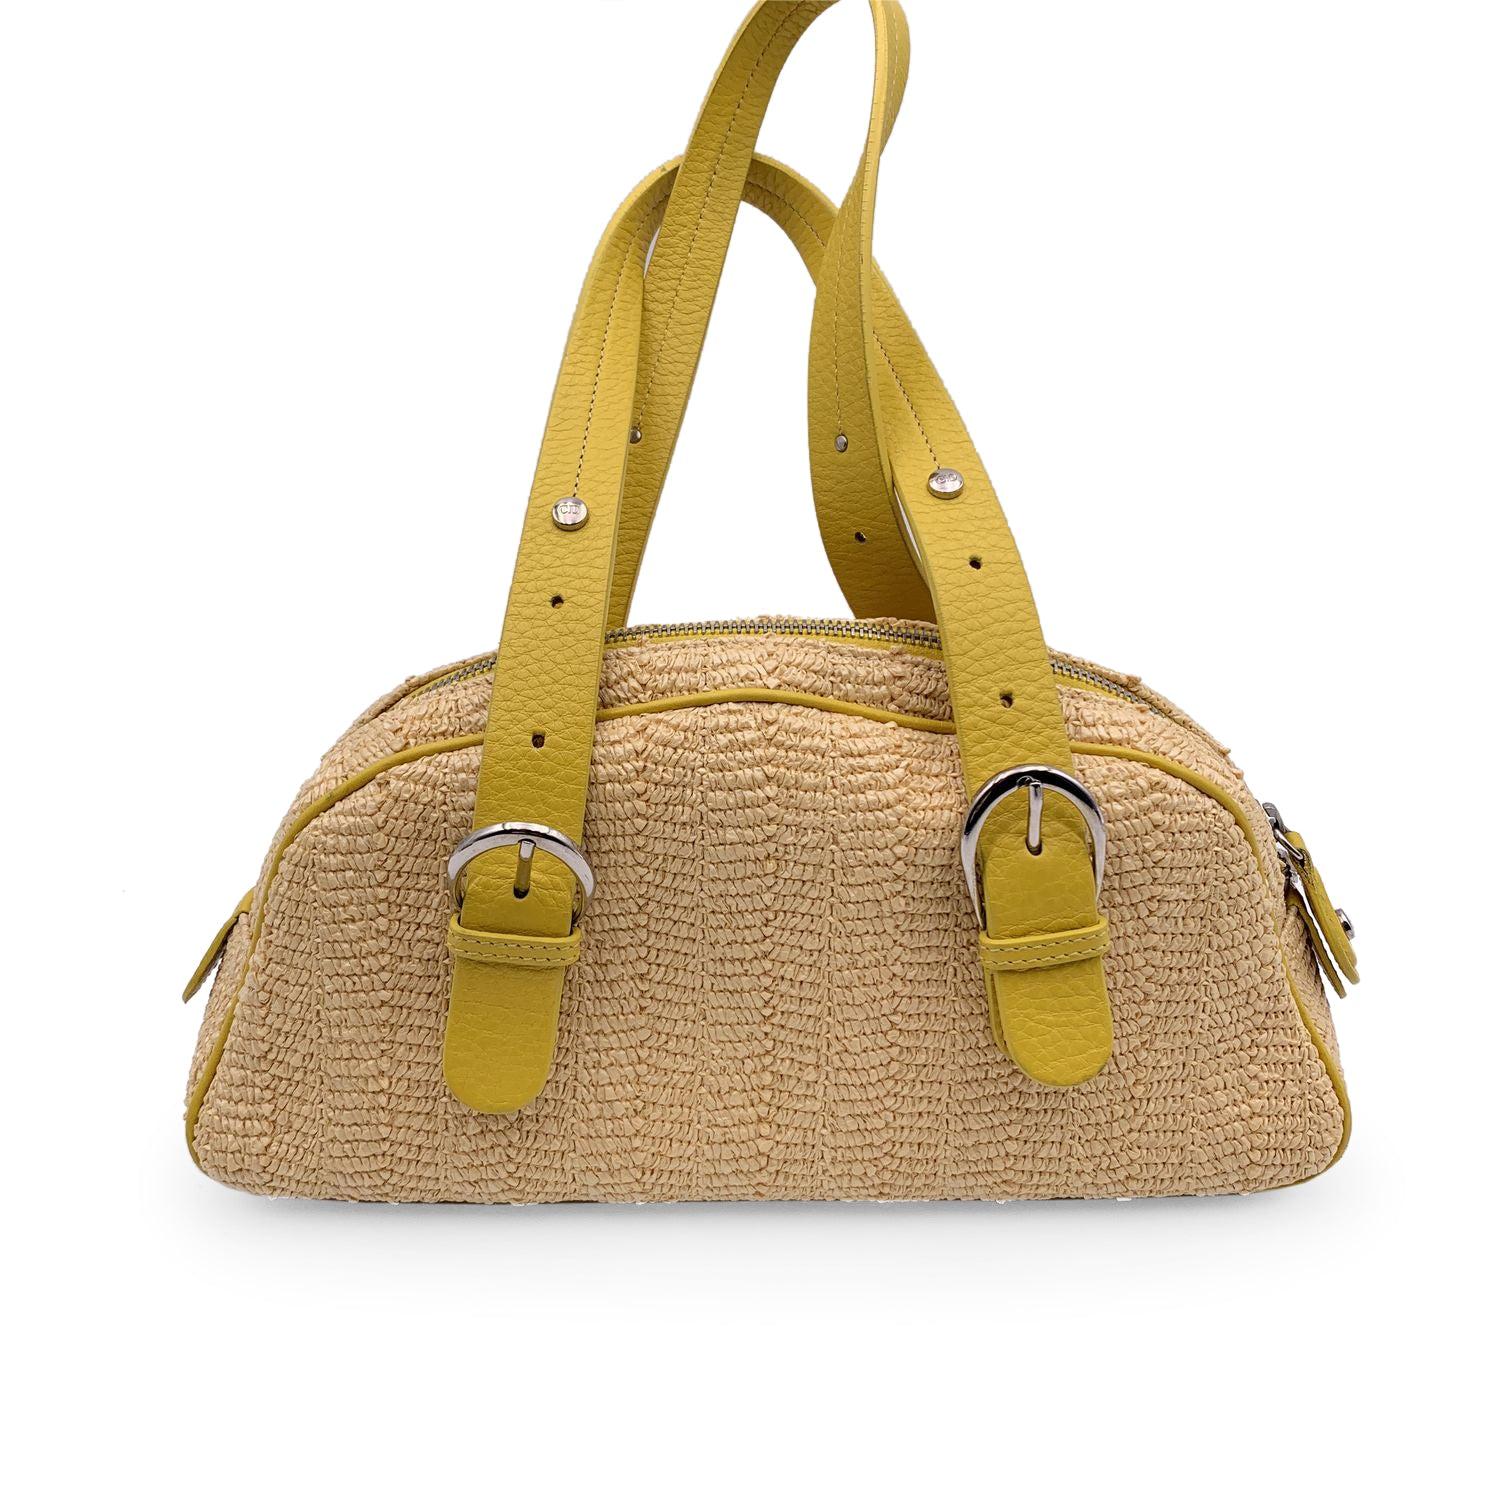 Christian Dior Limited Edition Yellow Raffia Flower Handbag In Excellent Condition For Sale In Rome, Rome